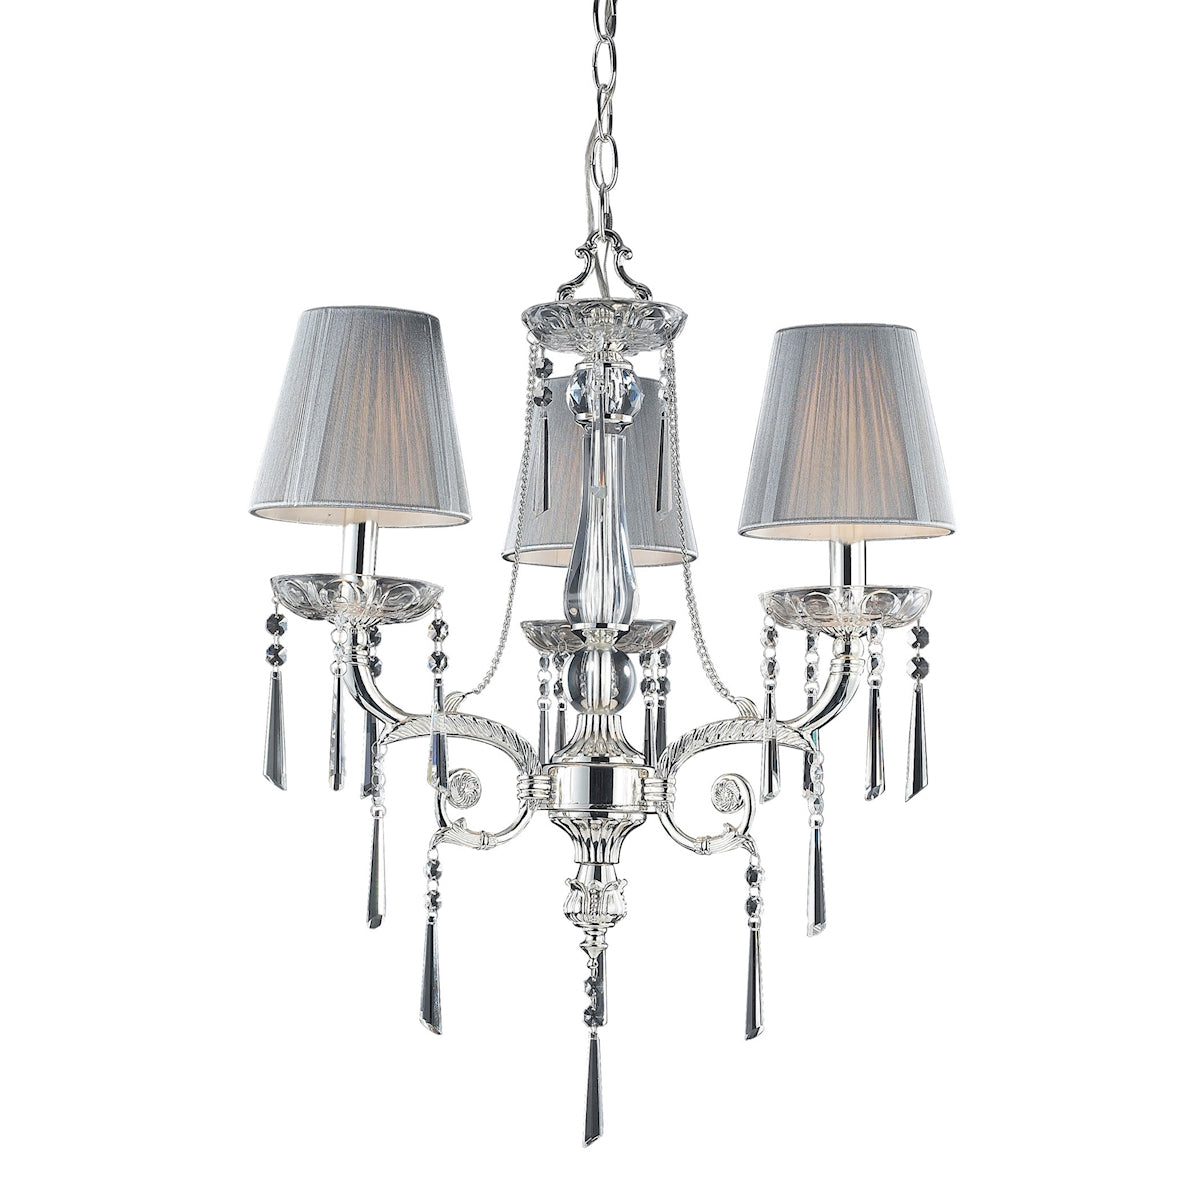 ELK Lighting 2395/3 Princess 3-Light Chandelier in Polished Silver with Fabric Shades